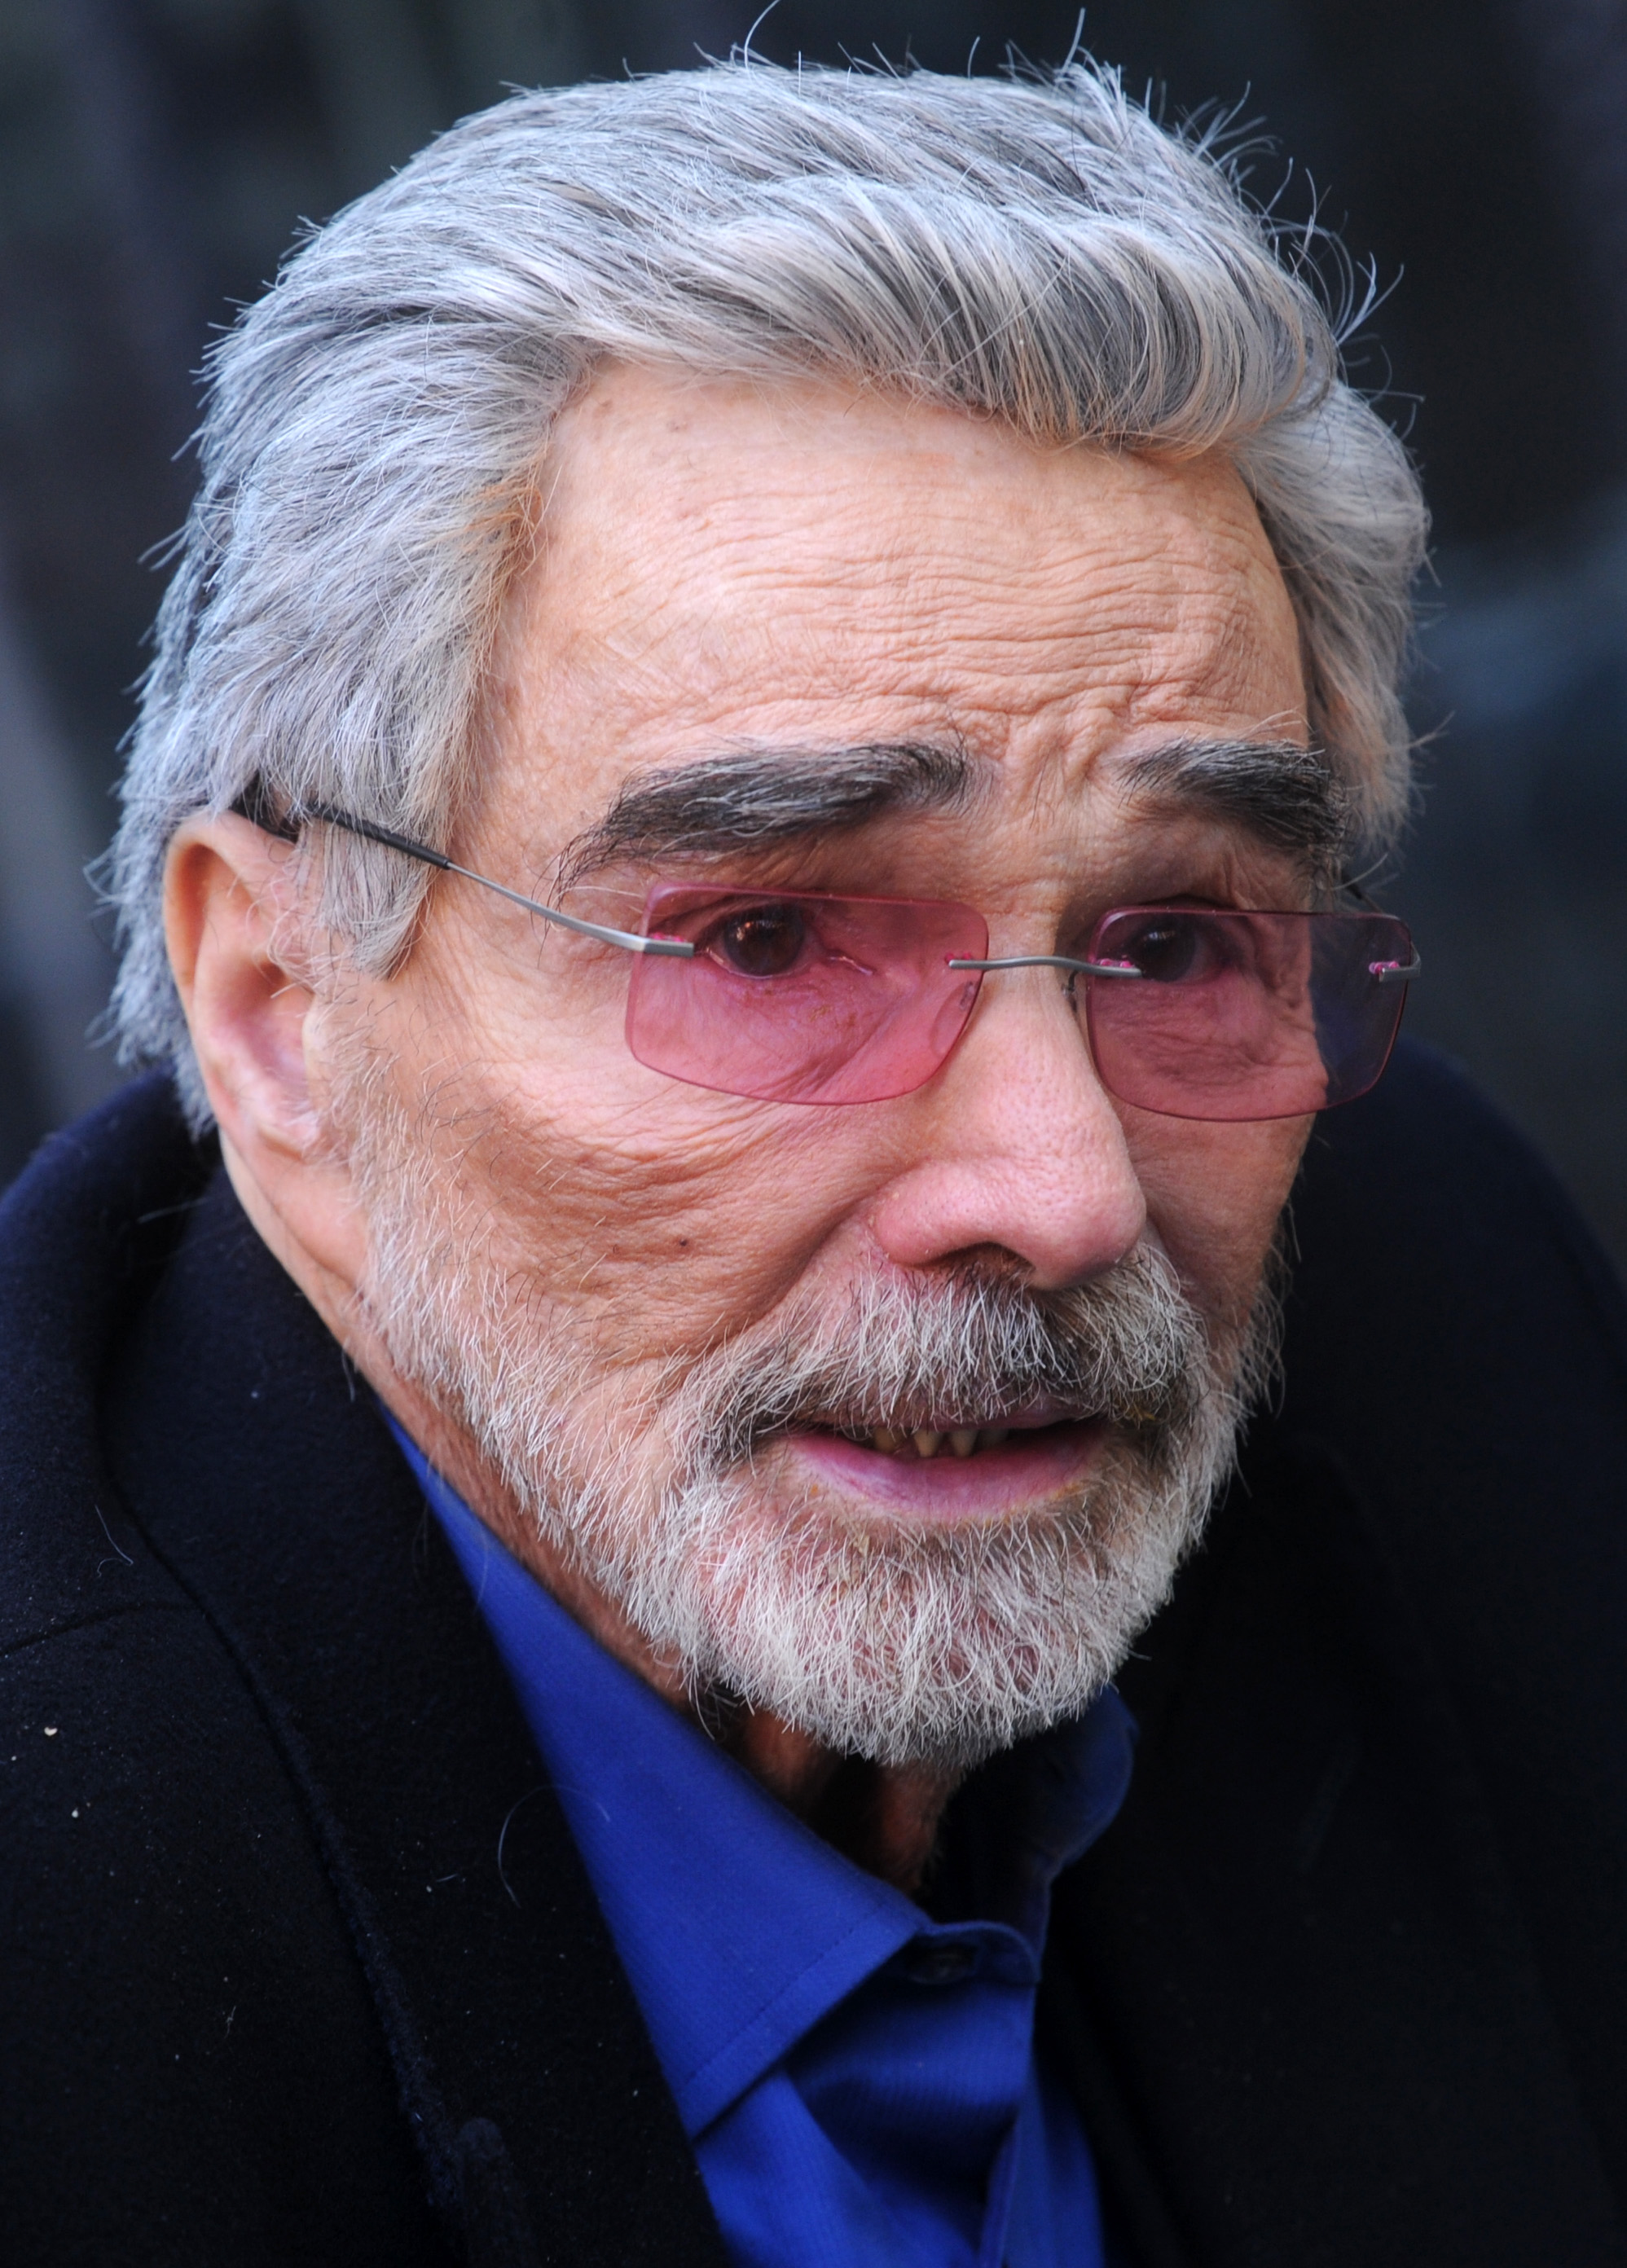 Burt Reynolds is seen on March 15, 2018 in New York City | Source: Getty Images